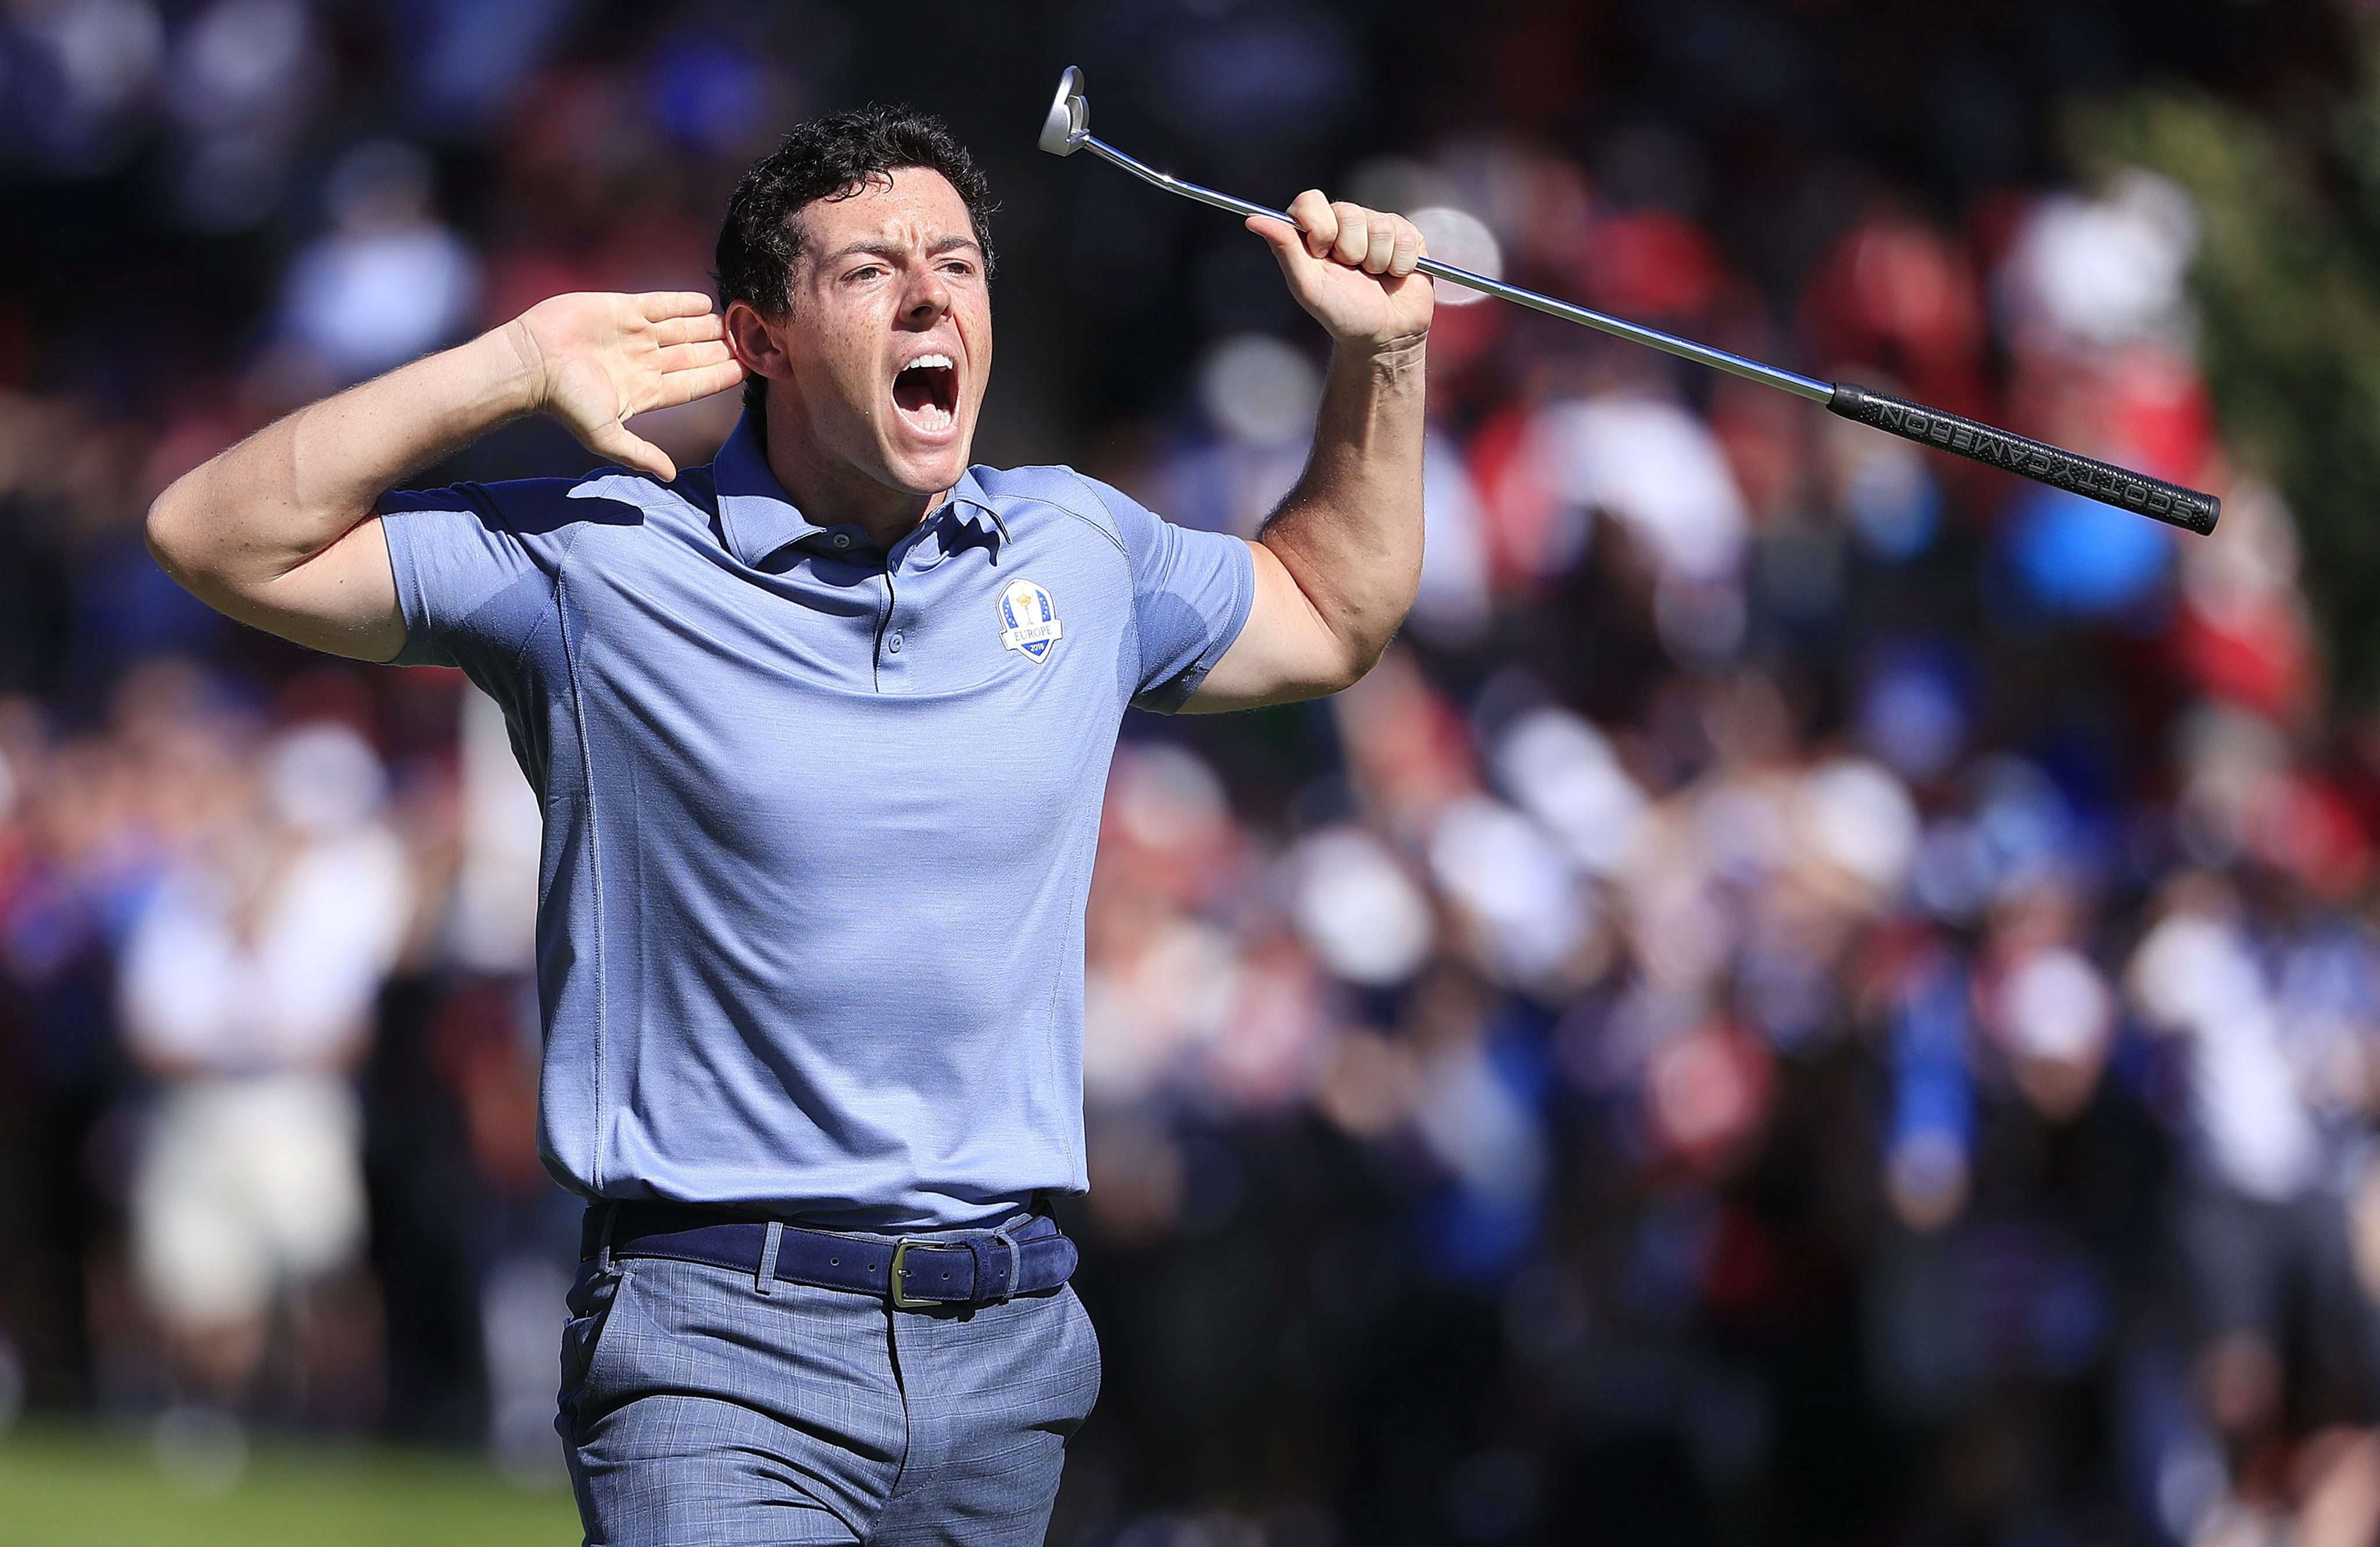 Rory McIlroy reacts to the gallery after his putt on the eighth hole during his singles match with Patrick Reed. Photo: EPA